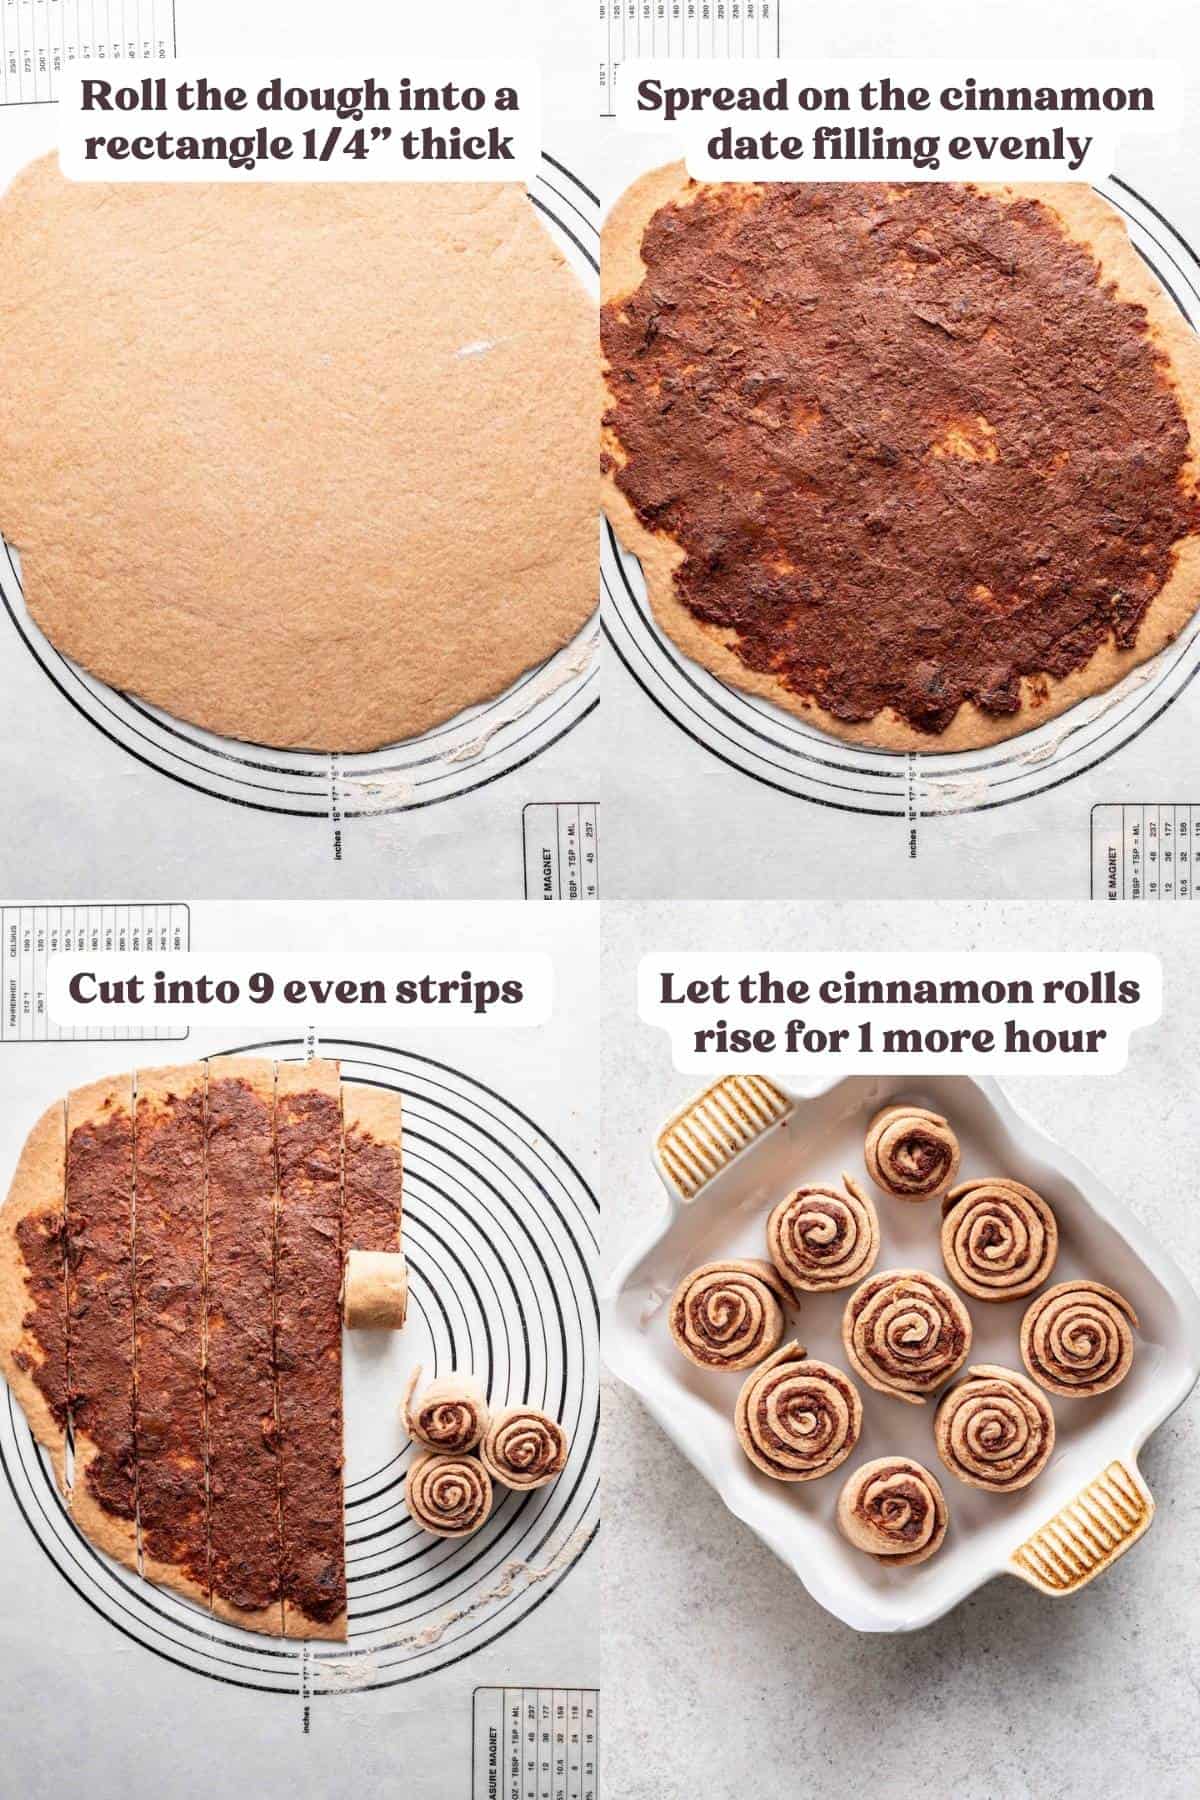 4 image collage showing how to roll out cinnamon roll dough, spread on filling, cut into strips, and place in a baking dish.